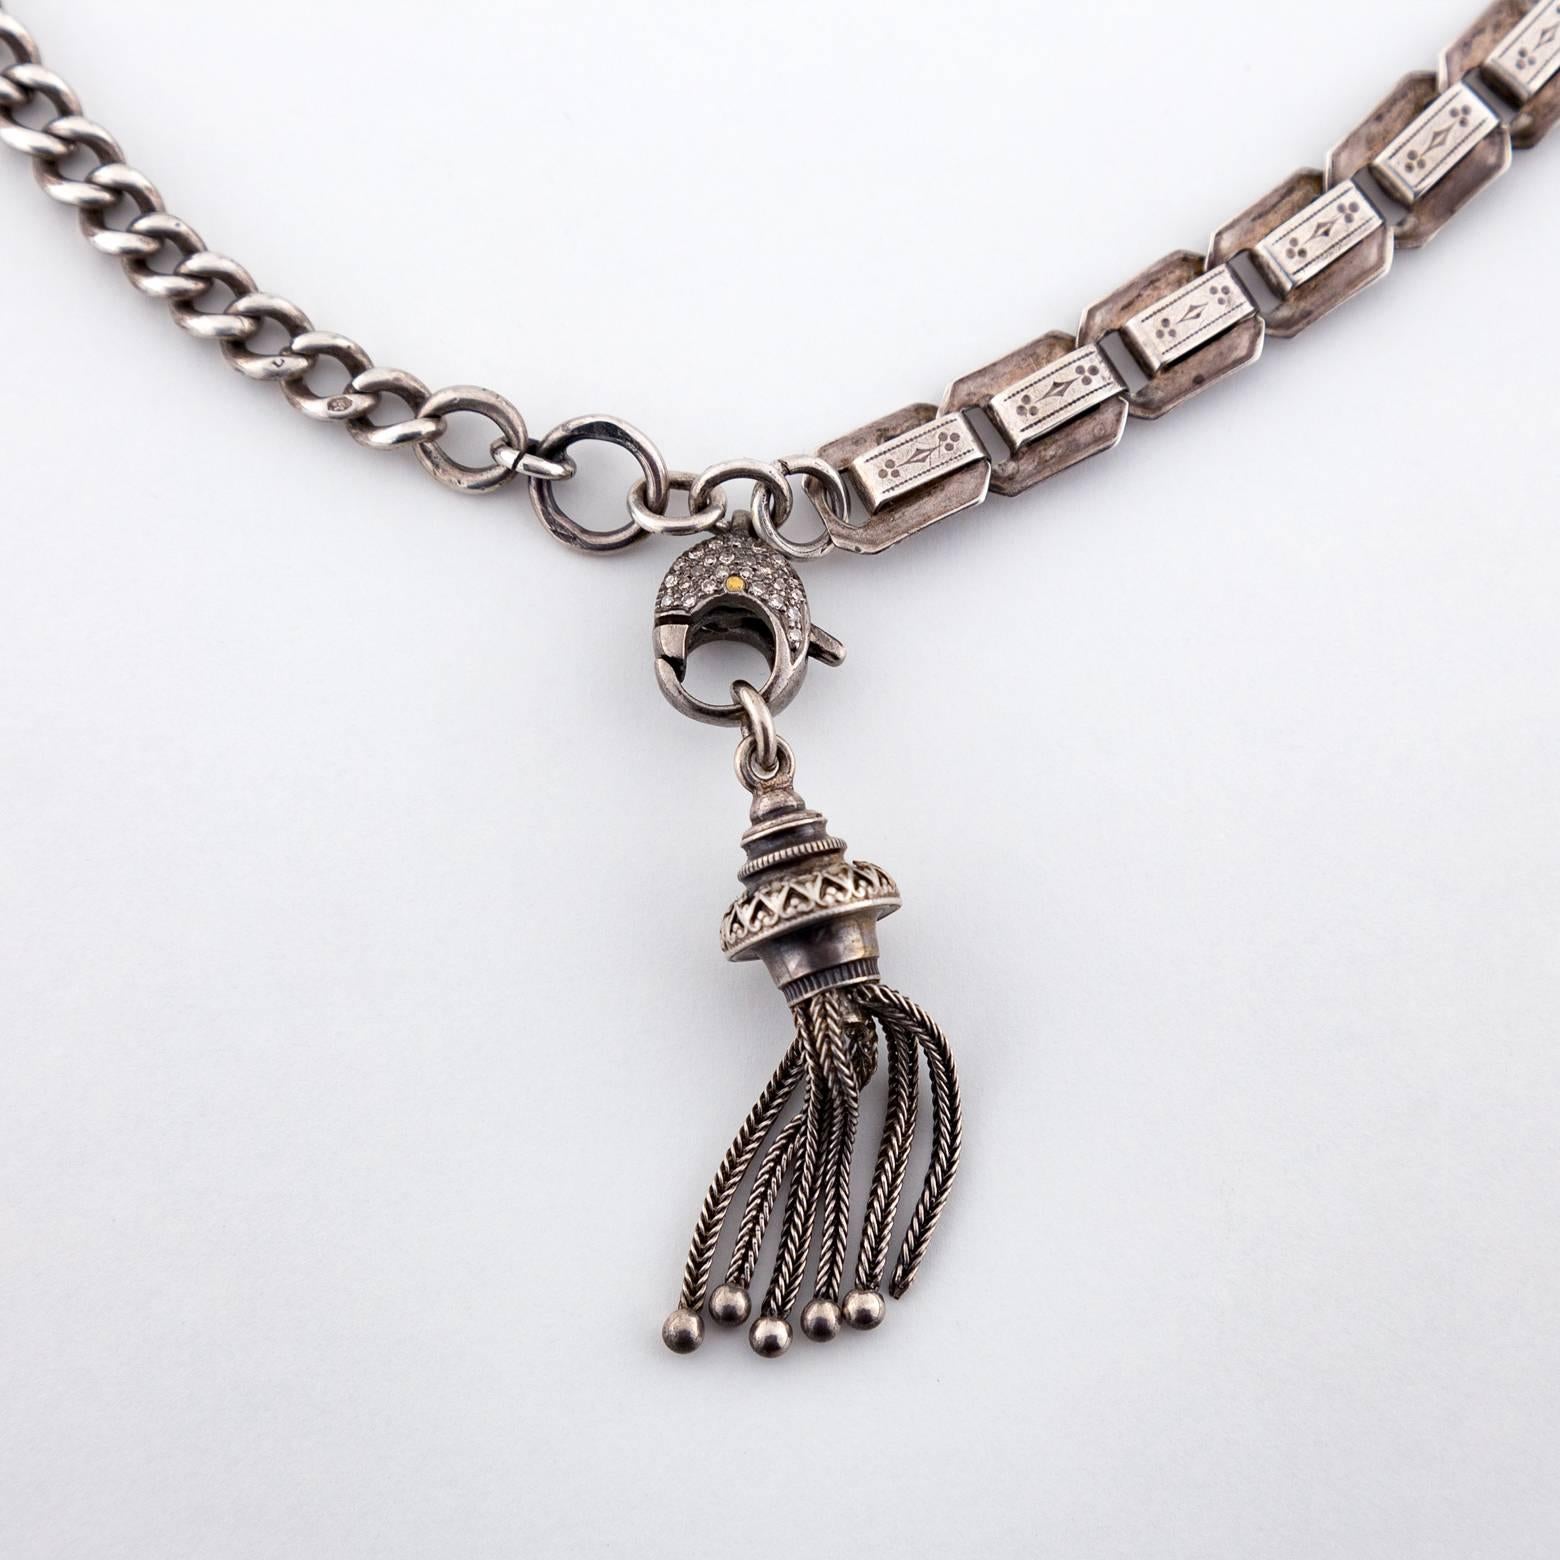 This beautiful chain and chain link necklace comes alive with a diamond tassel that compliments the different textures of the chains. A perfect balance of the masculine and feminine. It can be easily dressed up or dressed down. 